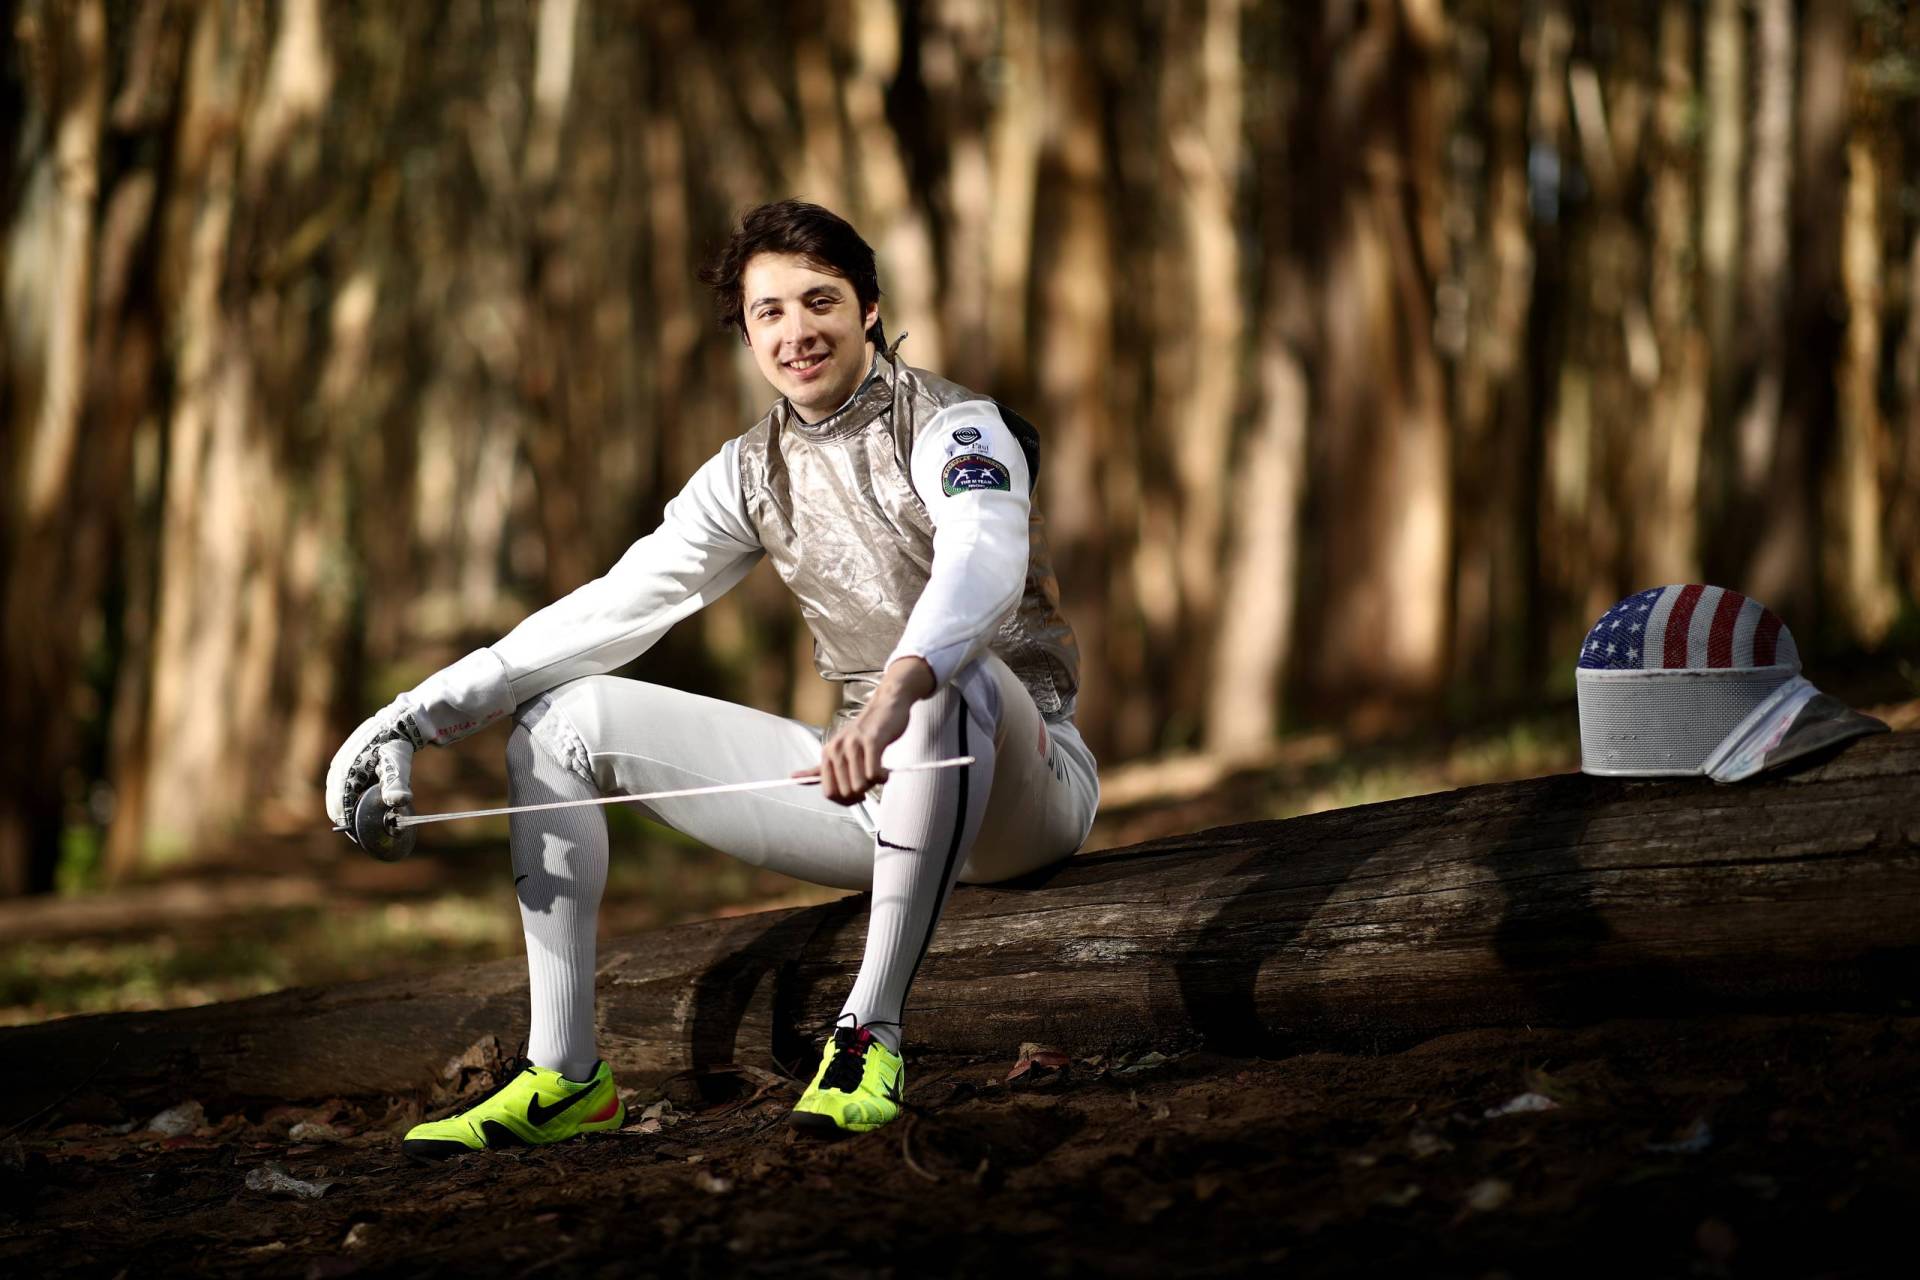 A man wearing fencing gear sits on a log in a wooded area. He is smiling and casually holding a foil.